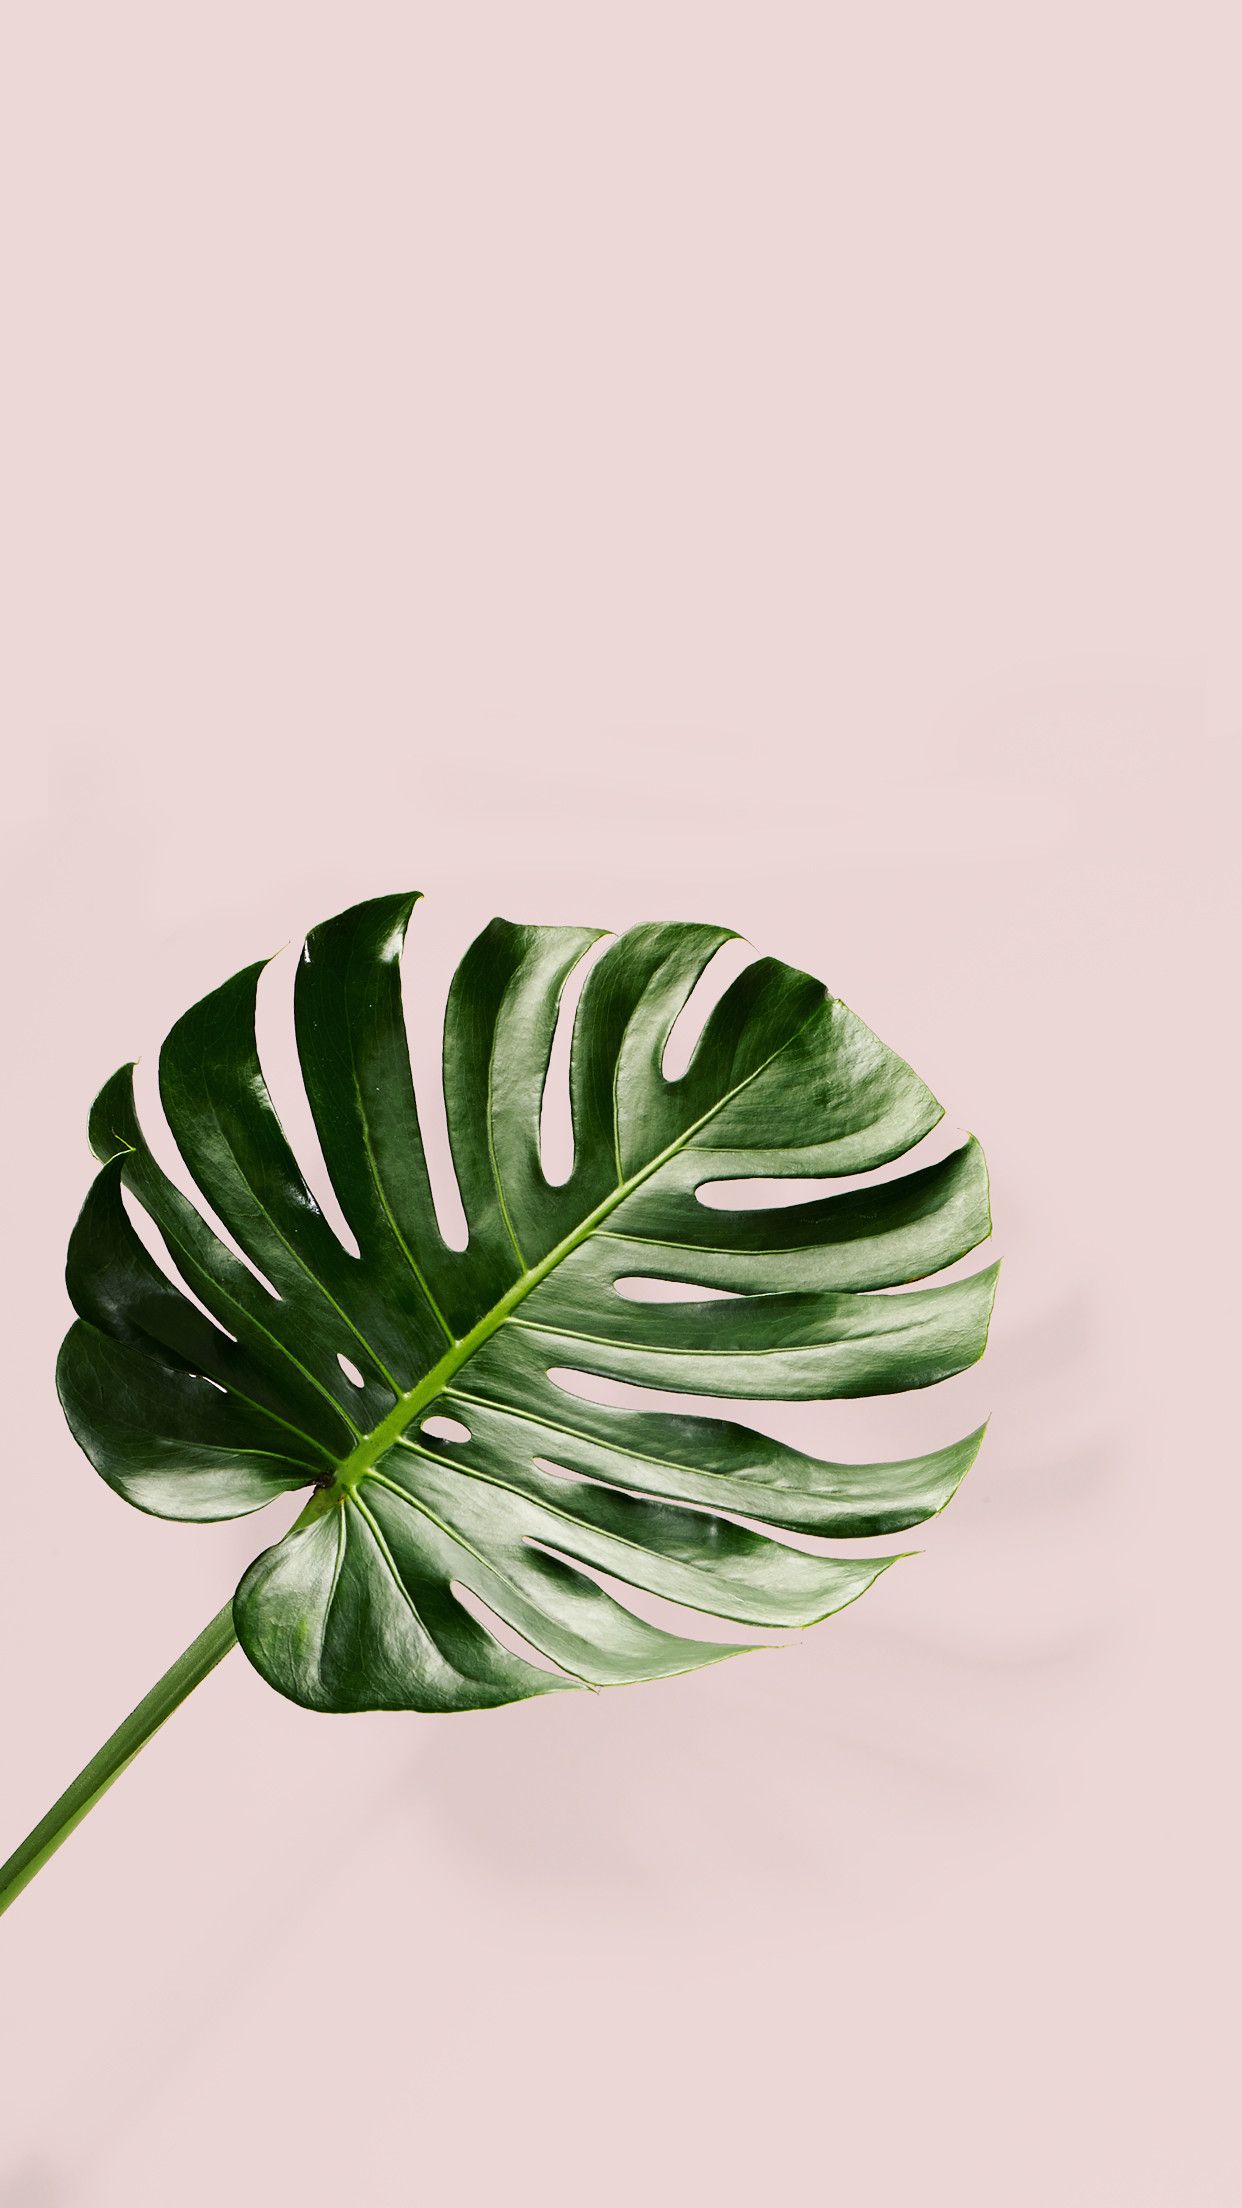 Free and customizable plant wallpaper templates